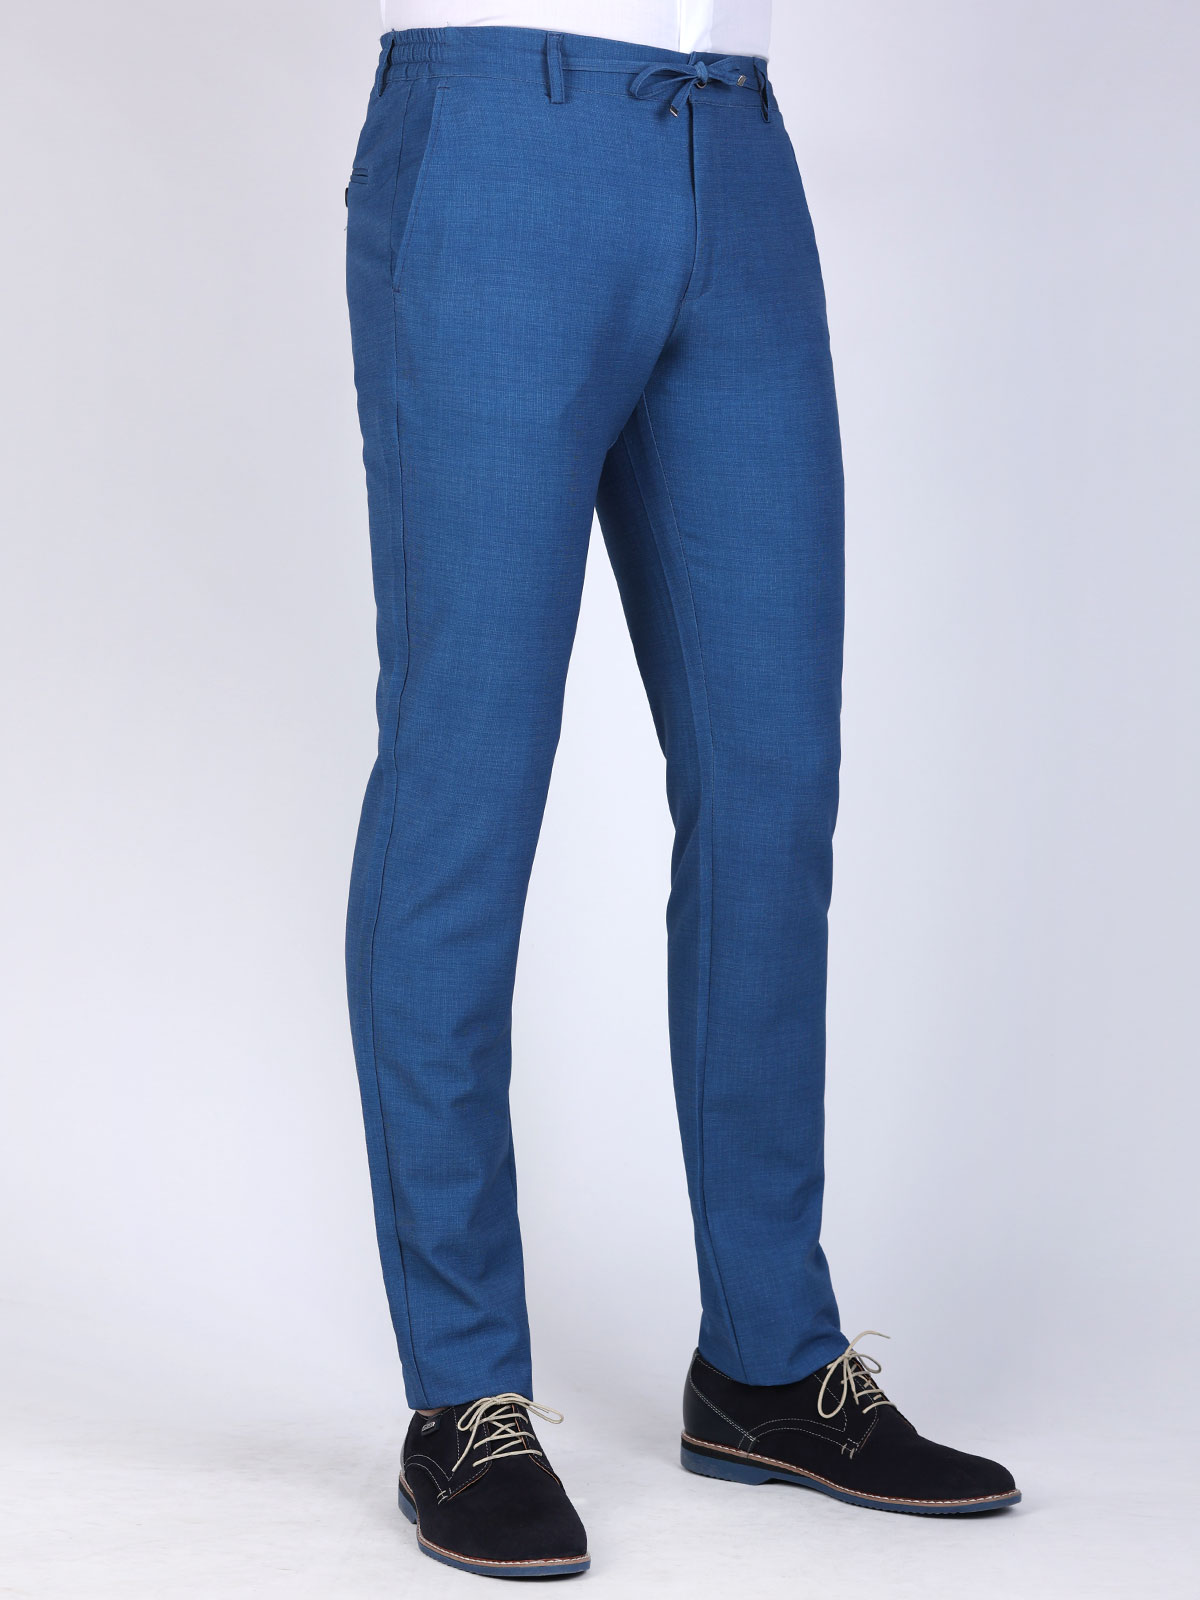 Twopiece suit in blue color - 68065 € 201.91 img4